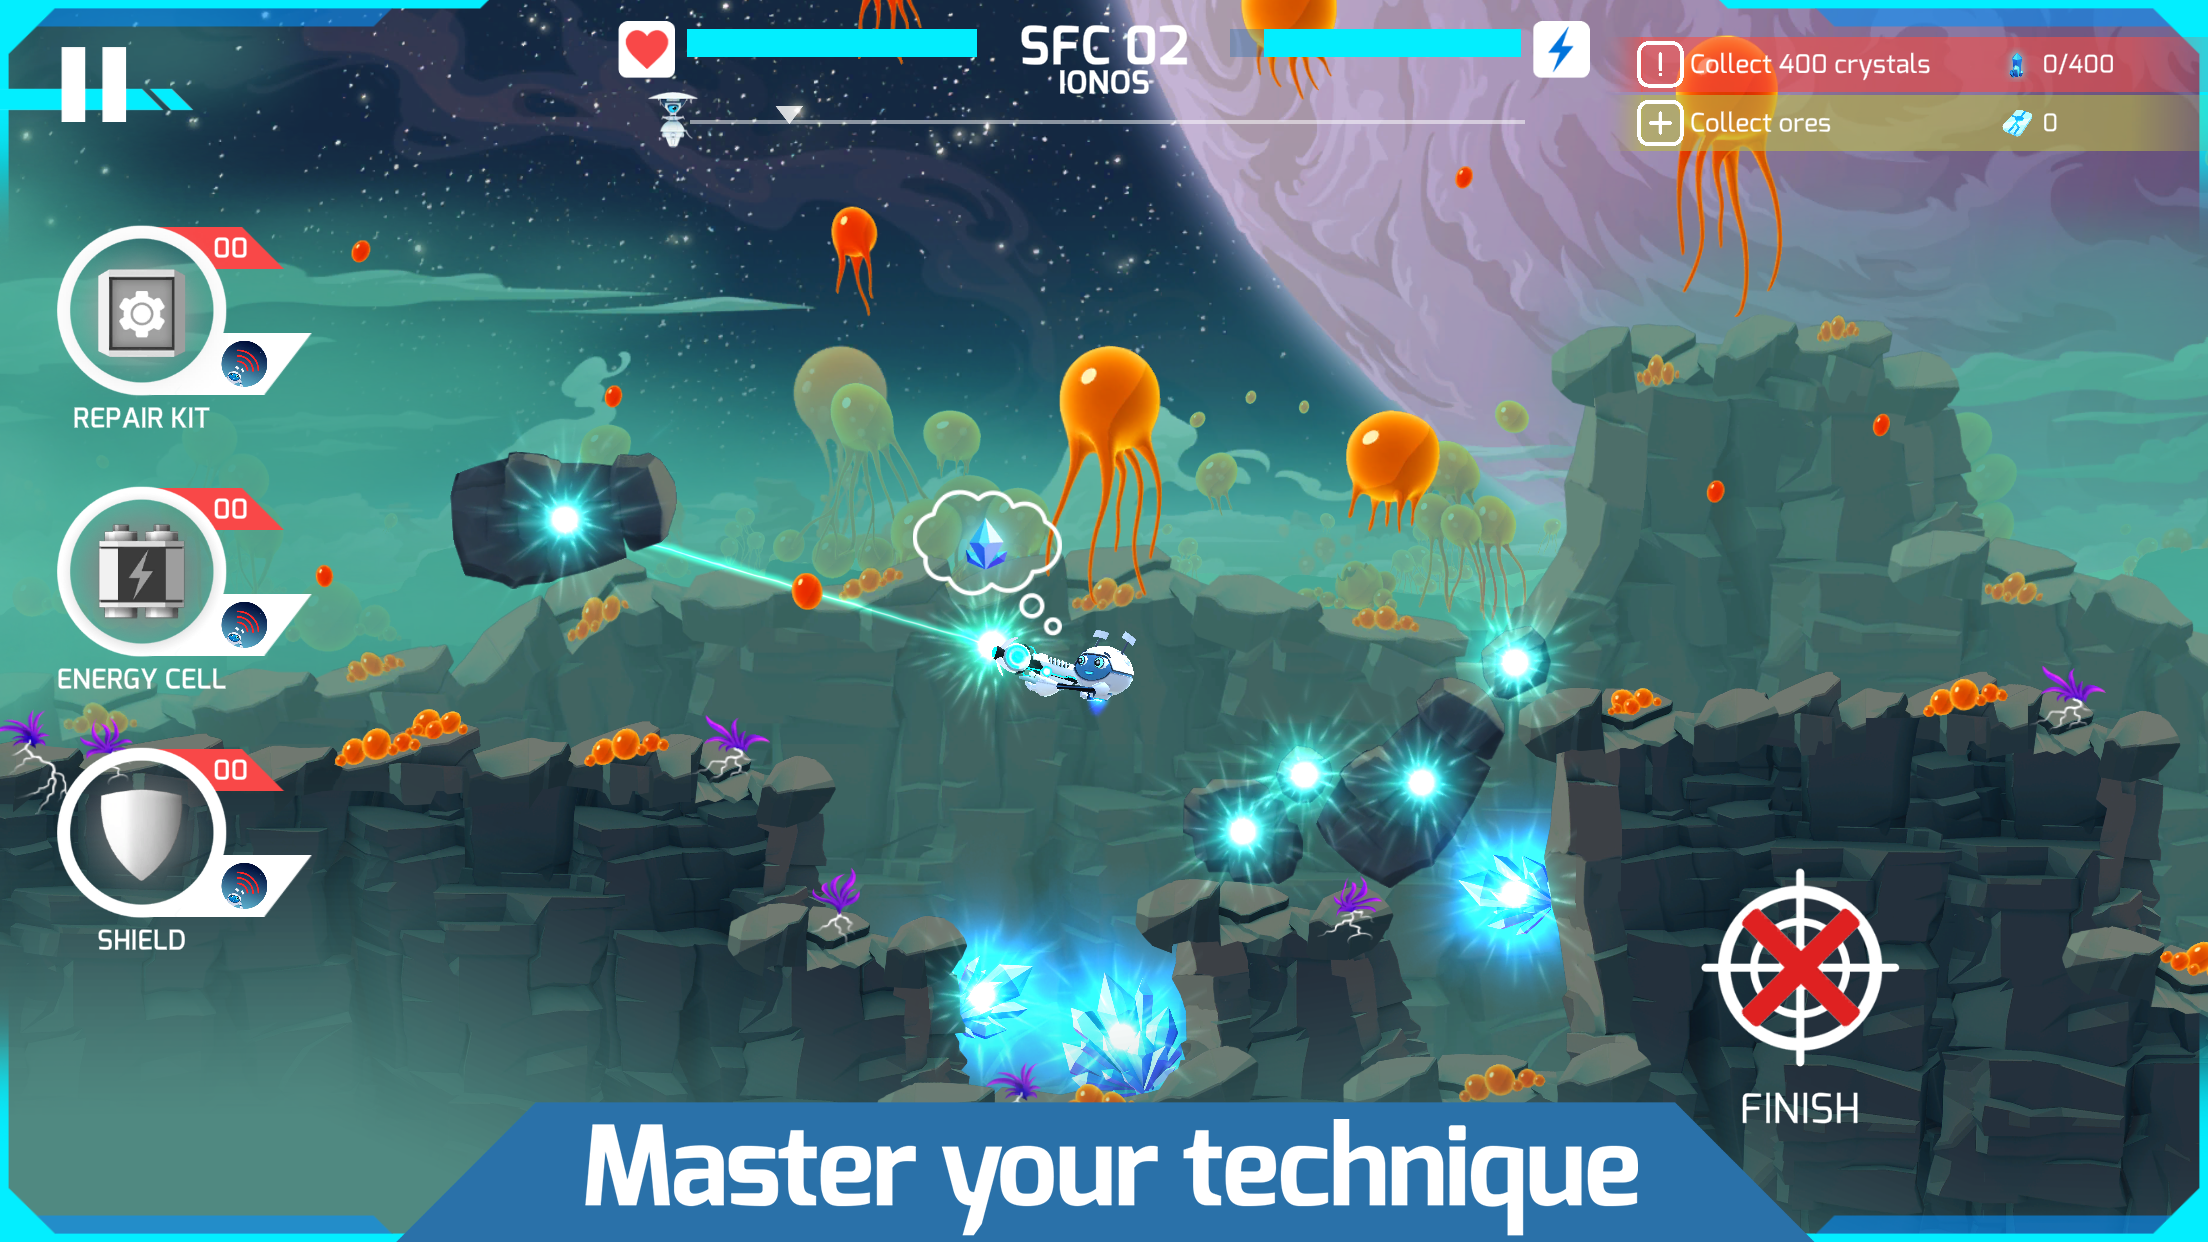 Mike the Planet Miner screenshot game